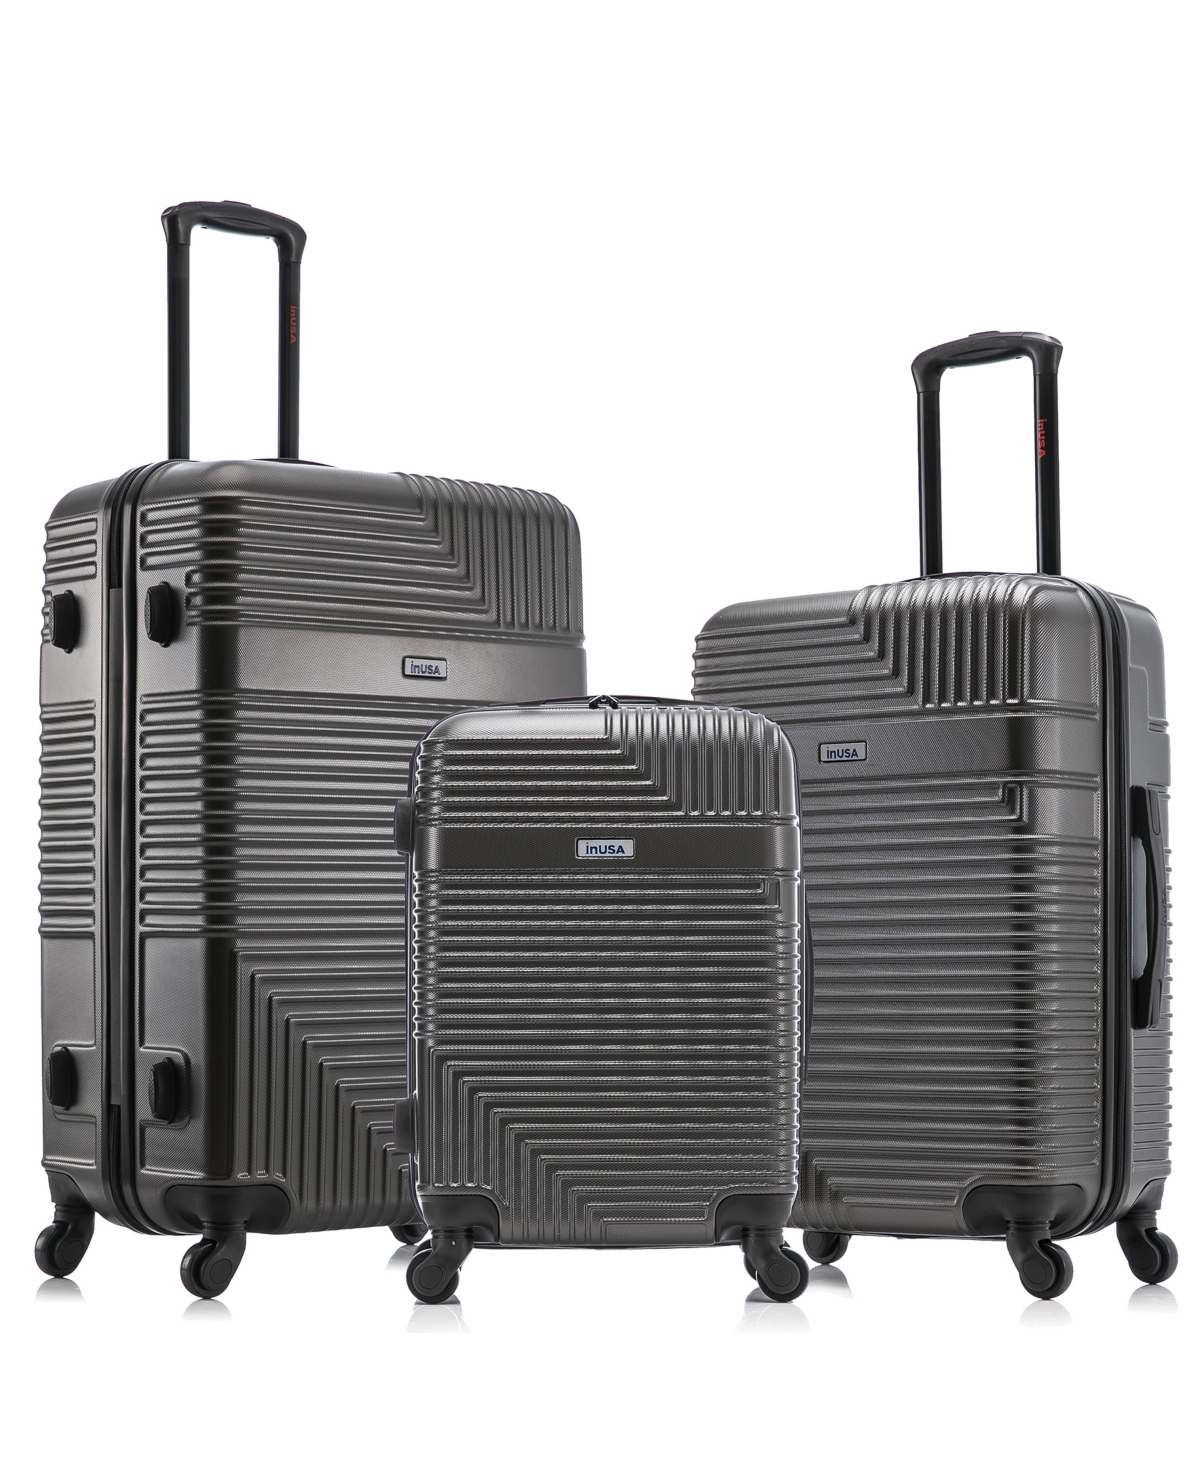 Resilience Lightweight Hardside Spinner Luggage Set, 3 piece - Silver